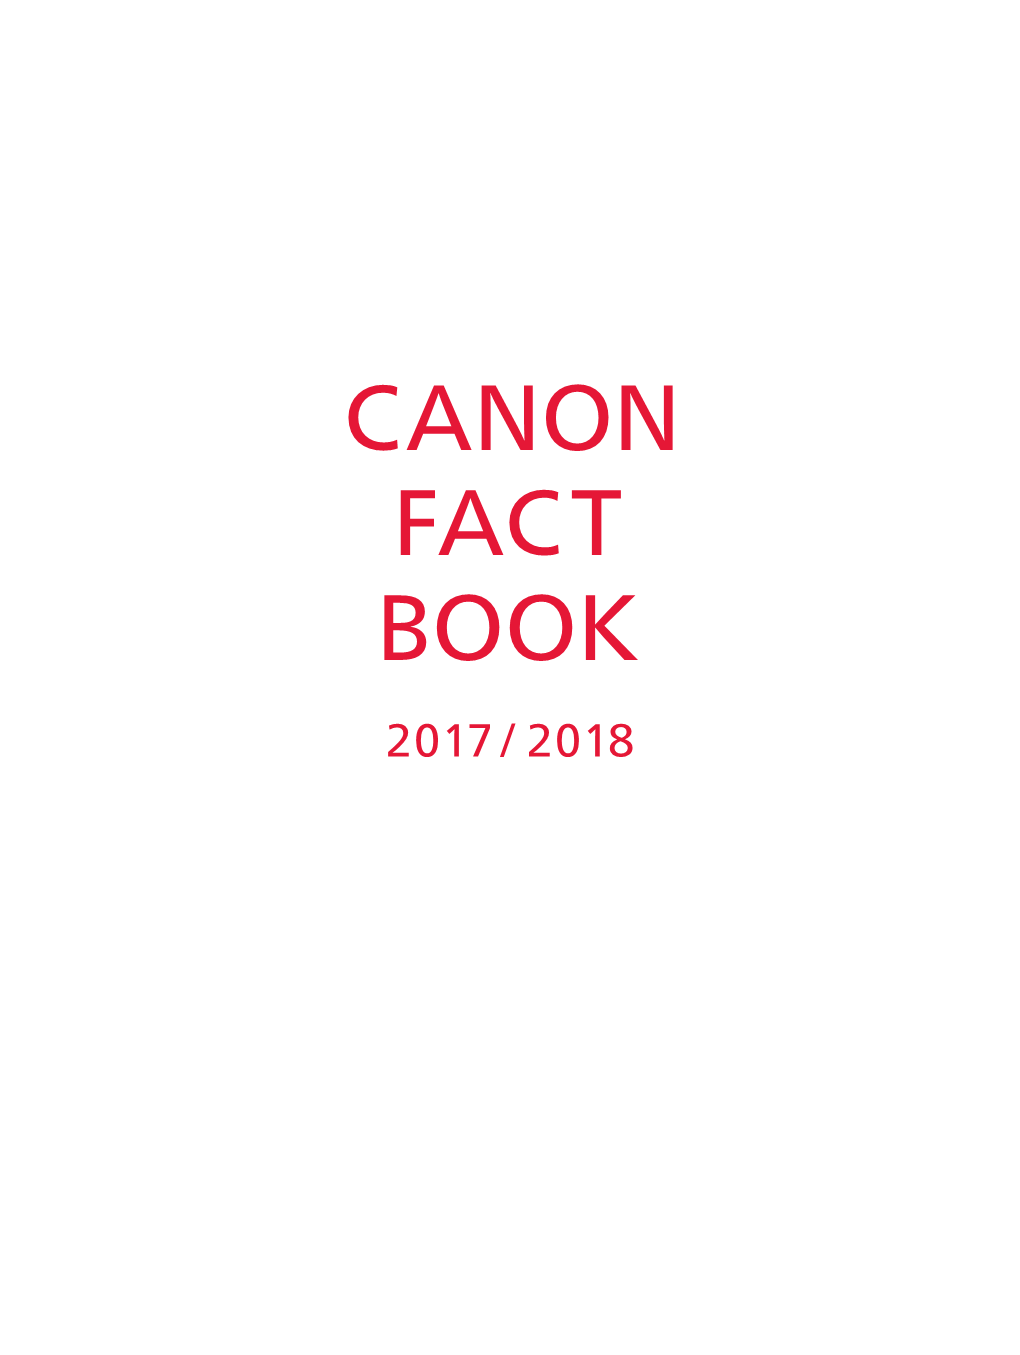 CANON FACT BOOK 2017 / 2018 CANON GROUP 10-YEAR SUMMARY (As of June 30, 2017)